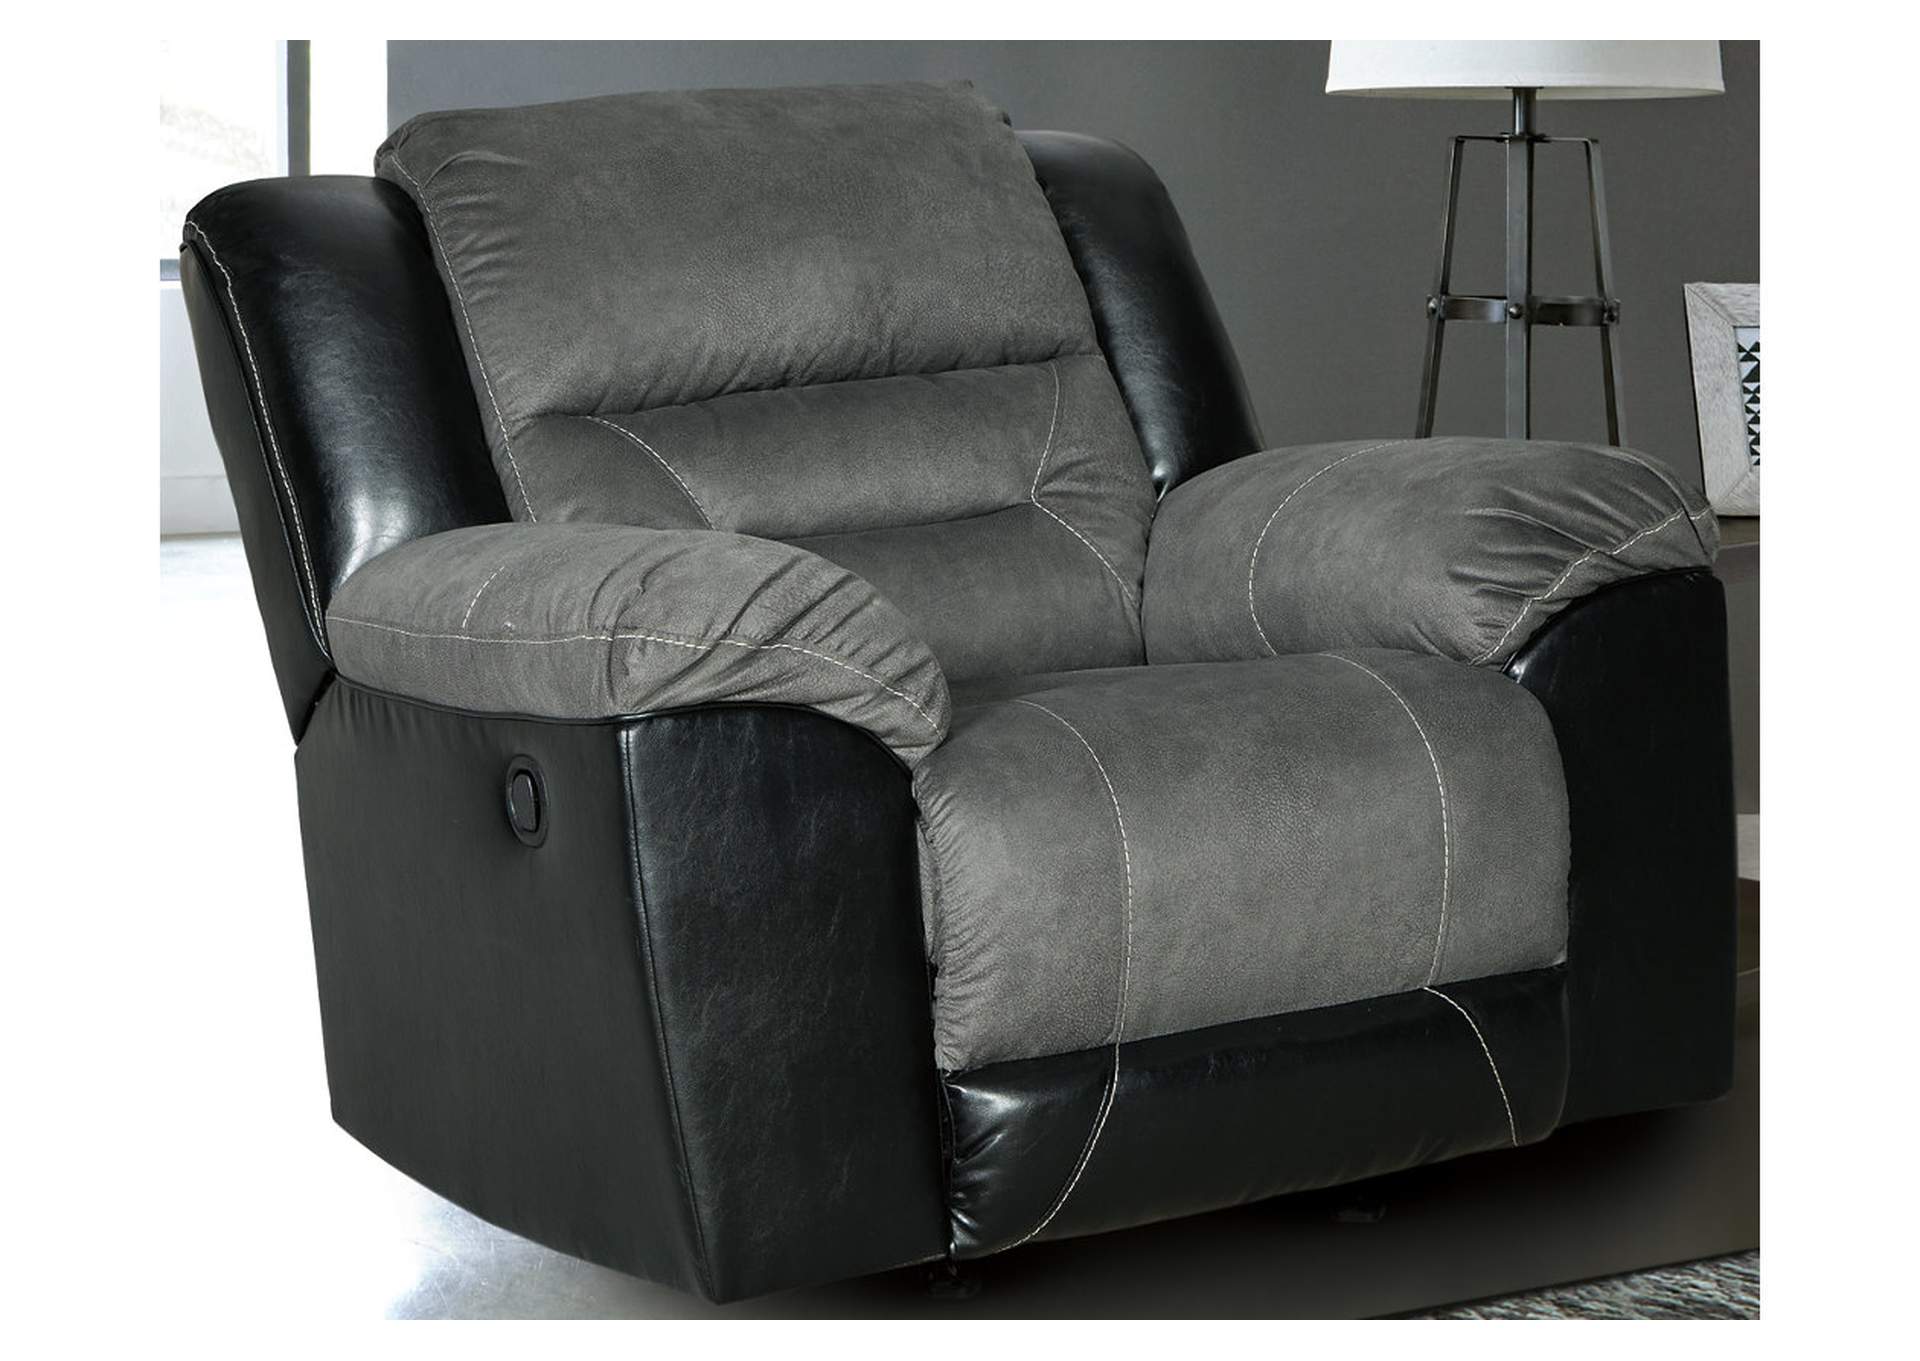 Earhart Recliner,Signature Design By Ashley